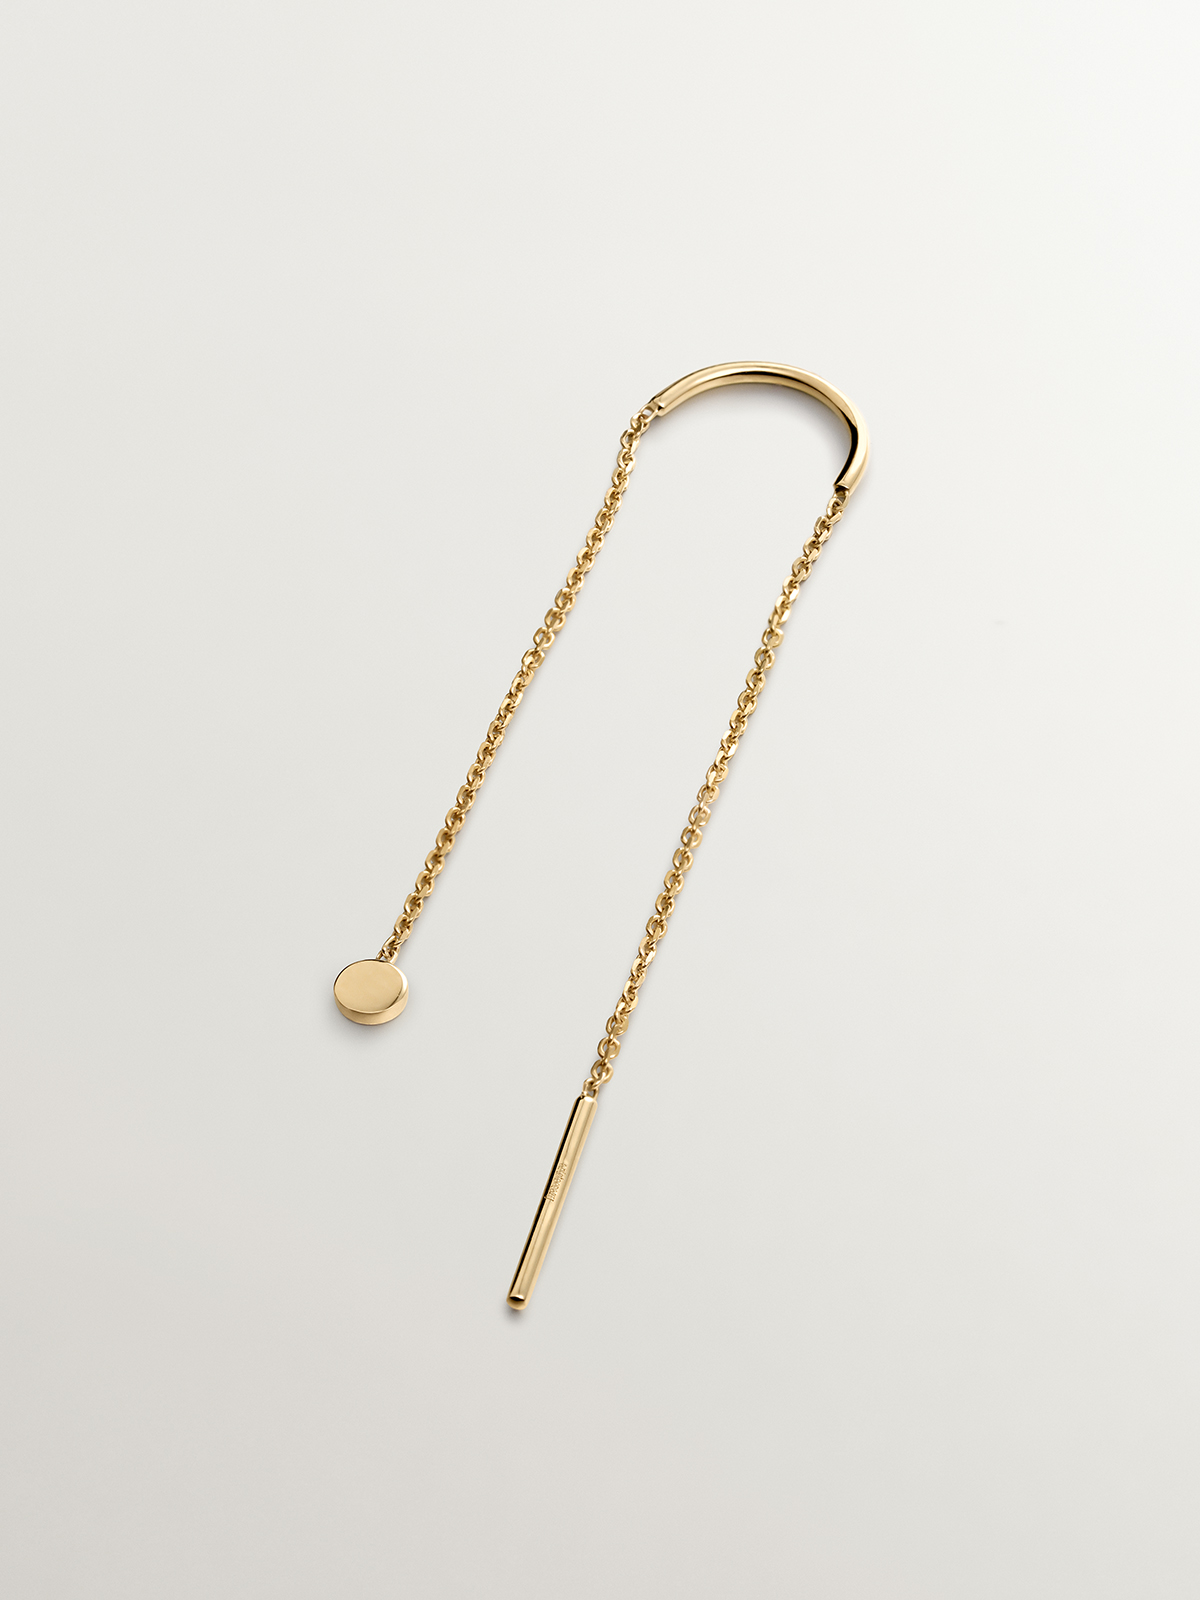 Single long 9K yellow gold earring with chain